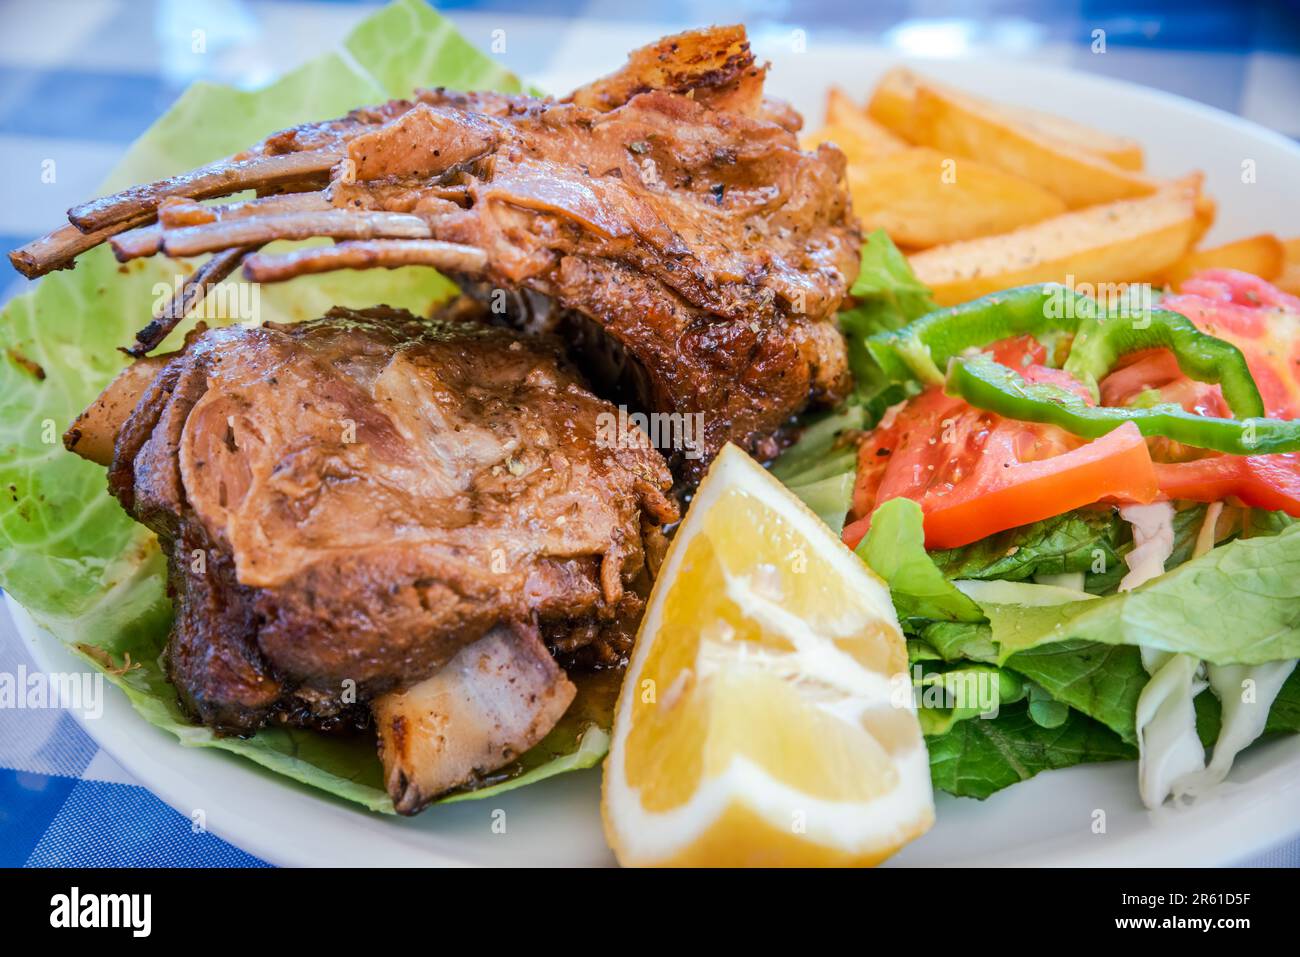 Juicy oven-baked lamb ribs infused with traditional Greece herbs and spices, flavorful and succulent Greek culinary experience. Stock Photo